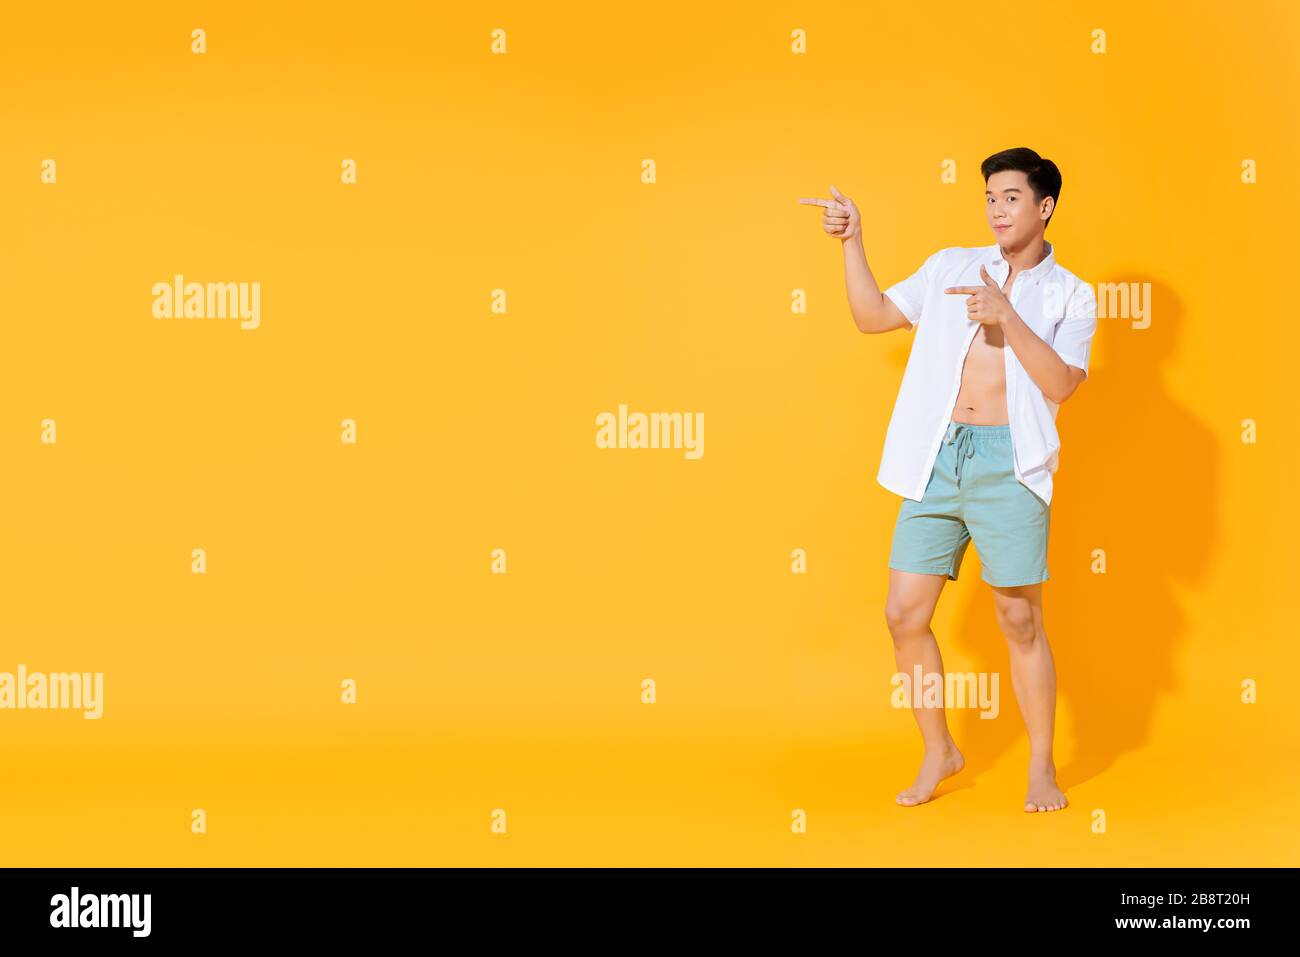 Full body of young handsome Asian man in casual summer outfit pointing hands to copy space aside on colorful yellow background Stock Photo